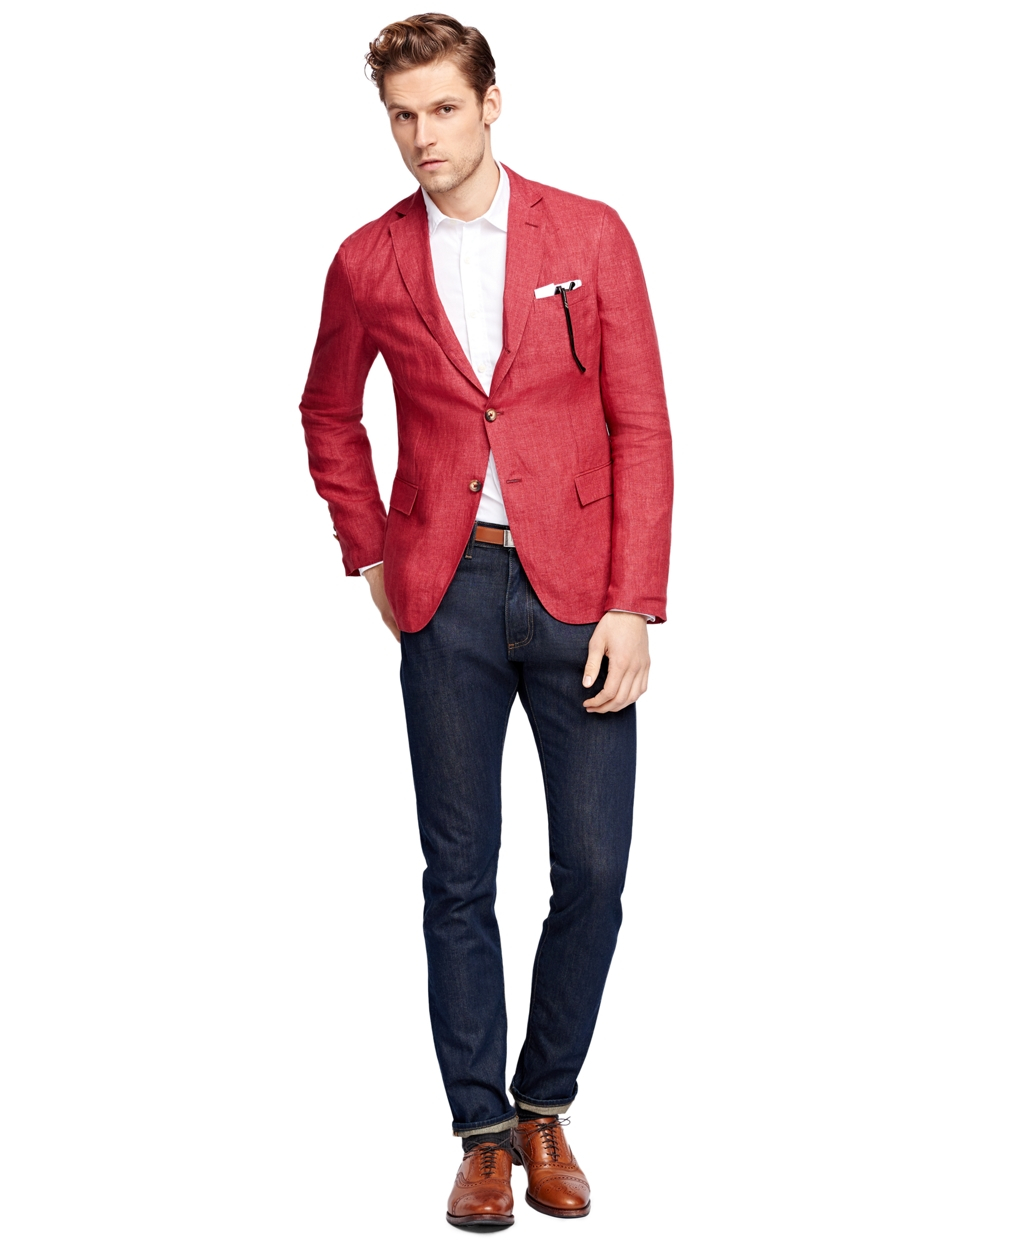 Brooks Brothers Linen Sport Coat in Red for Men - Lyst